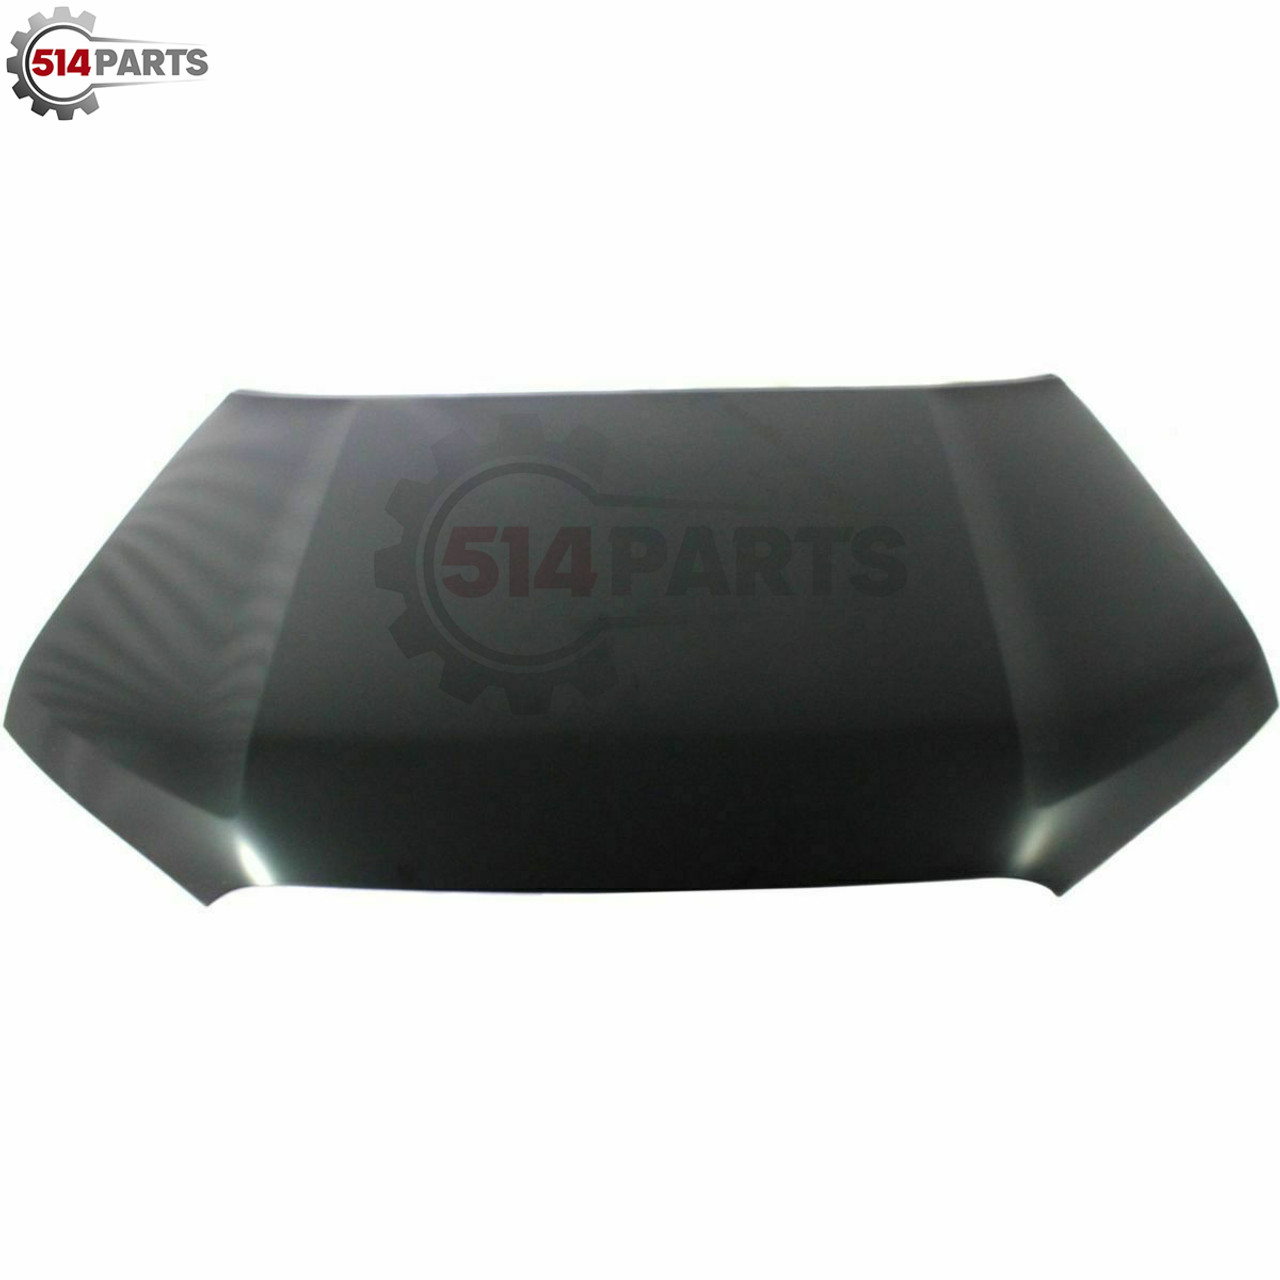 2010 - 2019 TOYOTA 4Runner HOOD without SCOOP - CAPOT